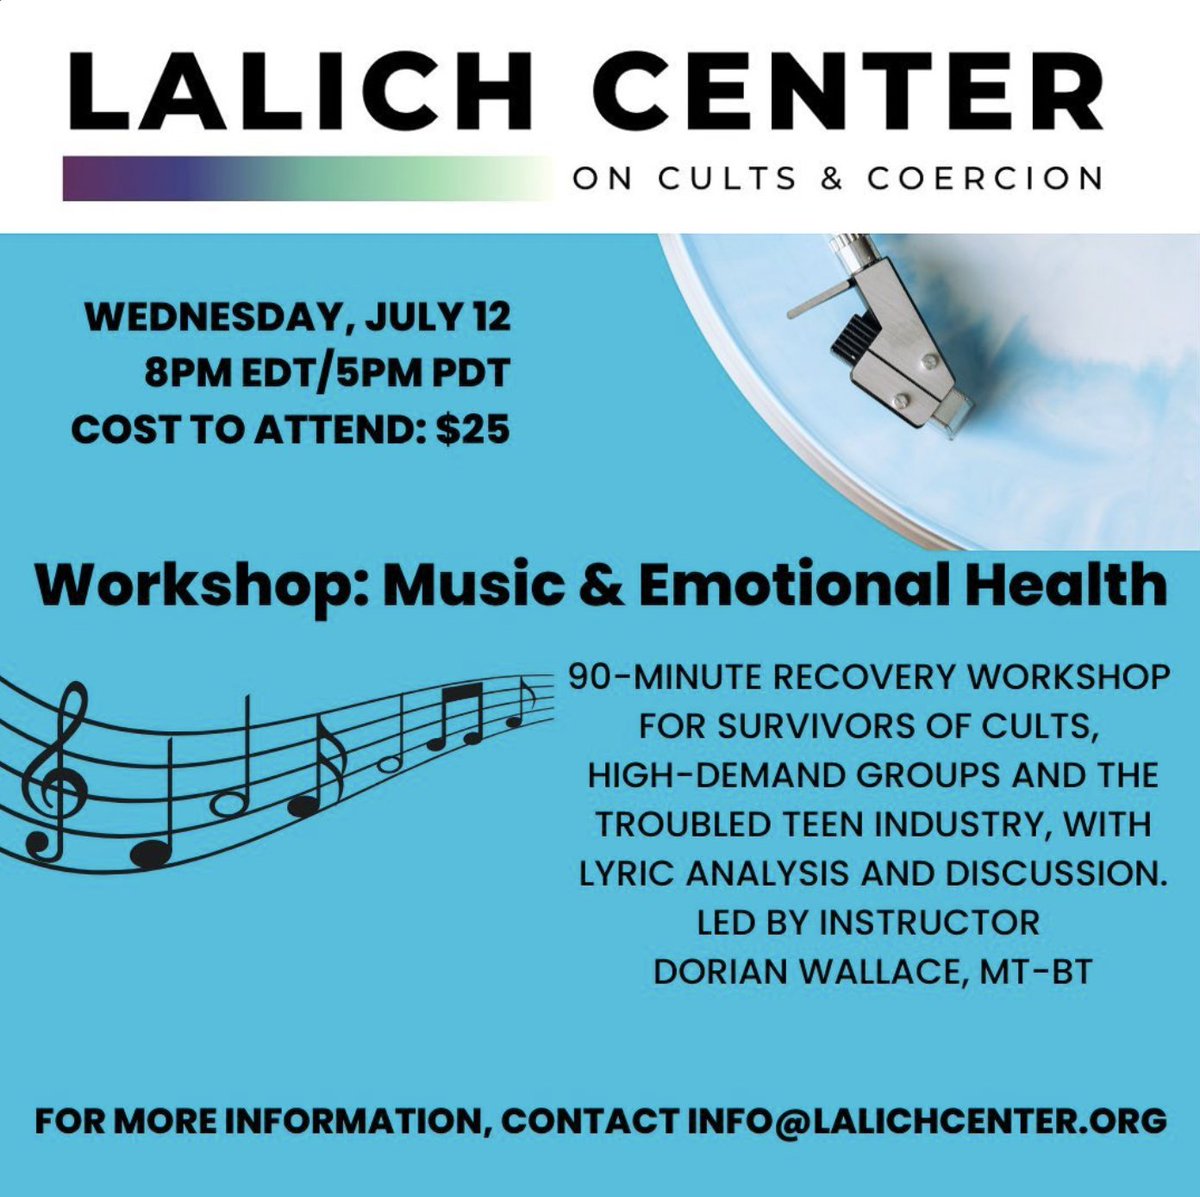 Music therapy workshop for folks traumatized by religious cults. Pass this on to anyone who might benefit. Done by Zoom, so anyone can attend. 
For more details connect here: instagram.com/lalichcenter/